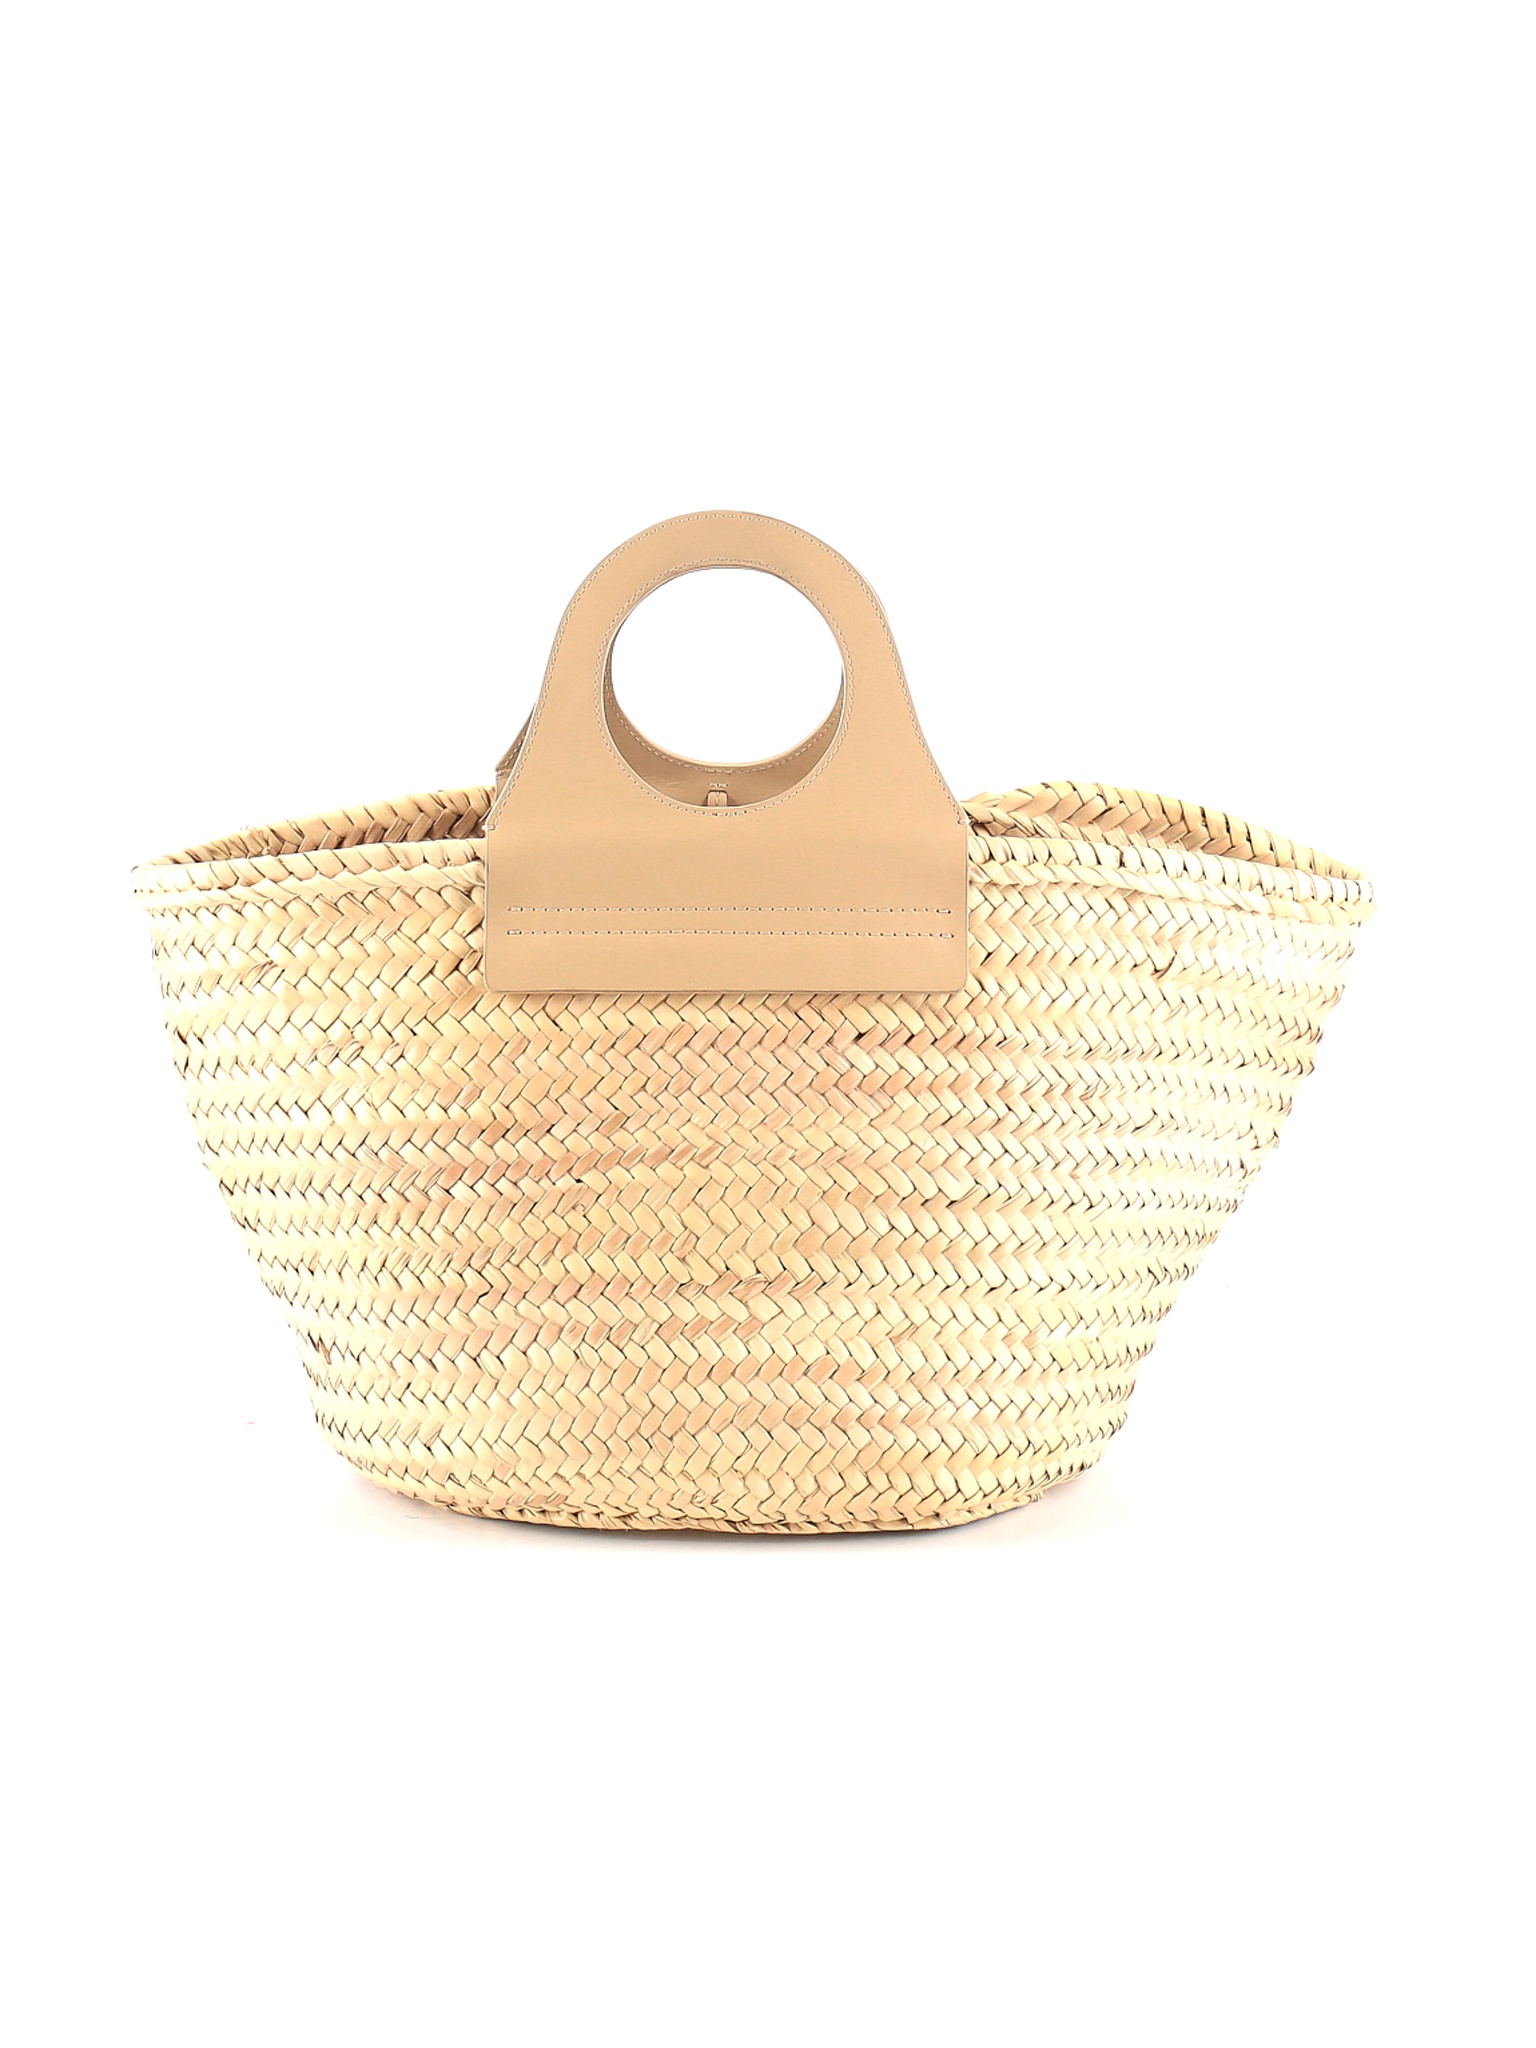 Taupe Cabas Straw Tote by Hereu for $20